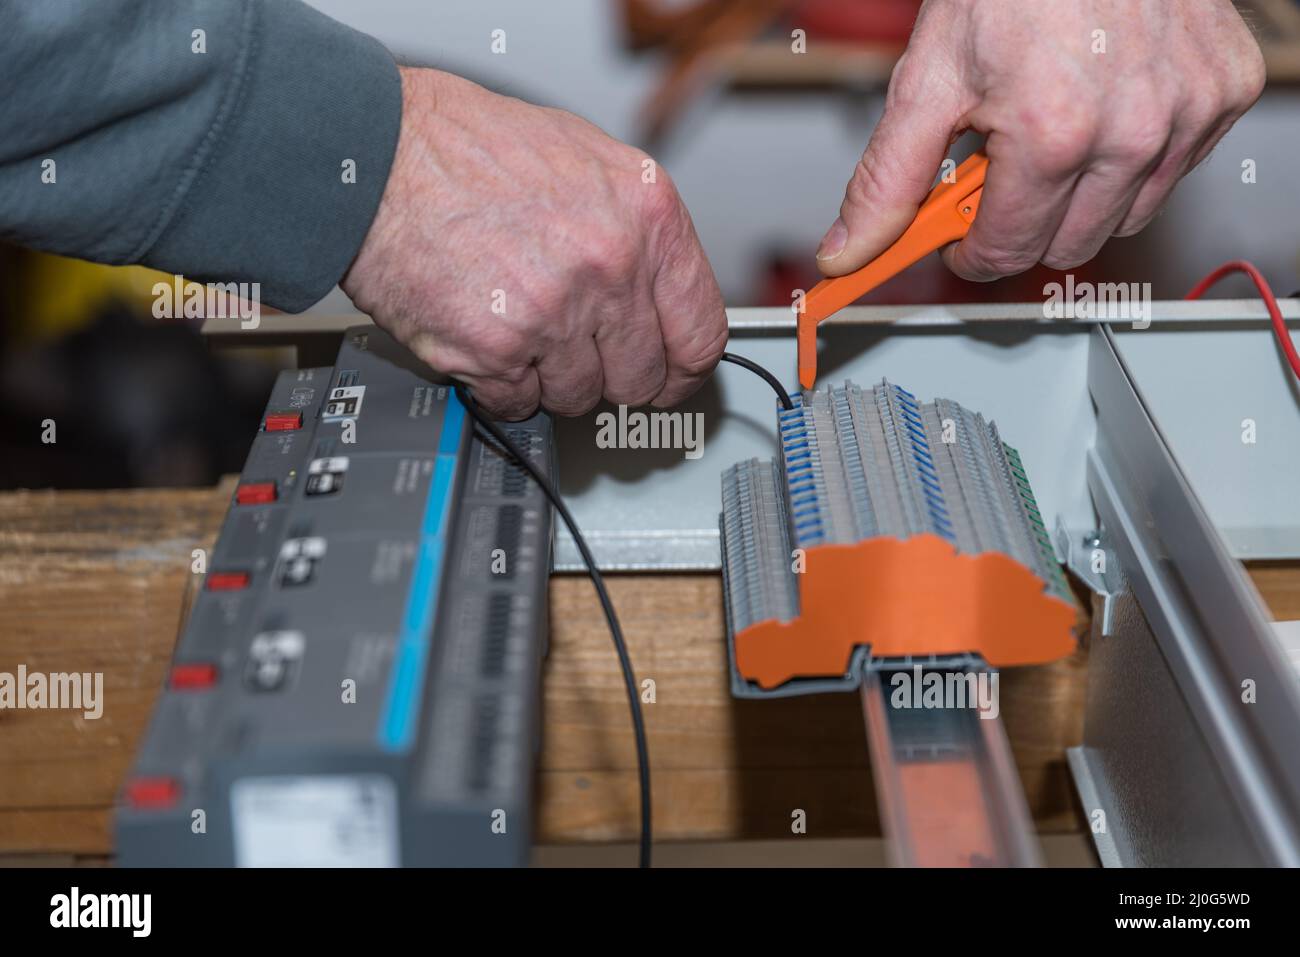 https://c8.alamy.com/comp/2J0G5WD/electrician-works-with-the-bus-system-close-up-craftsman-2J0G5WD.jpg